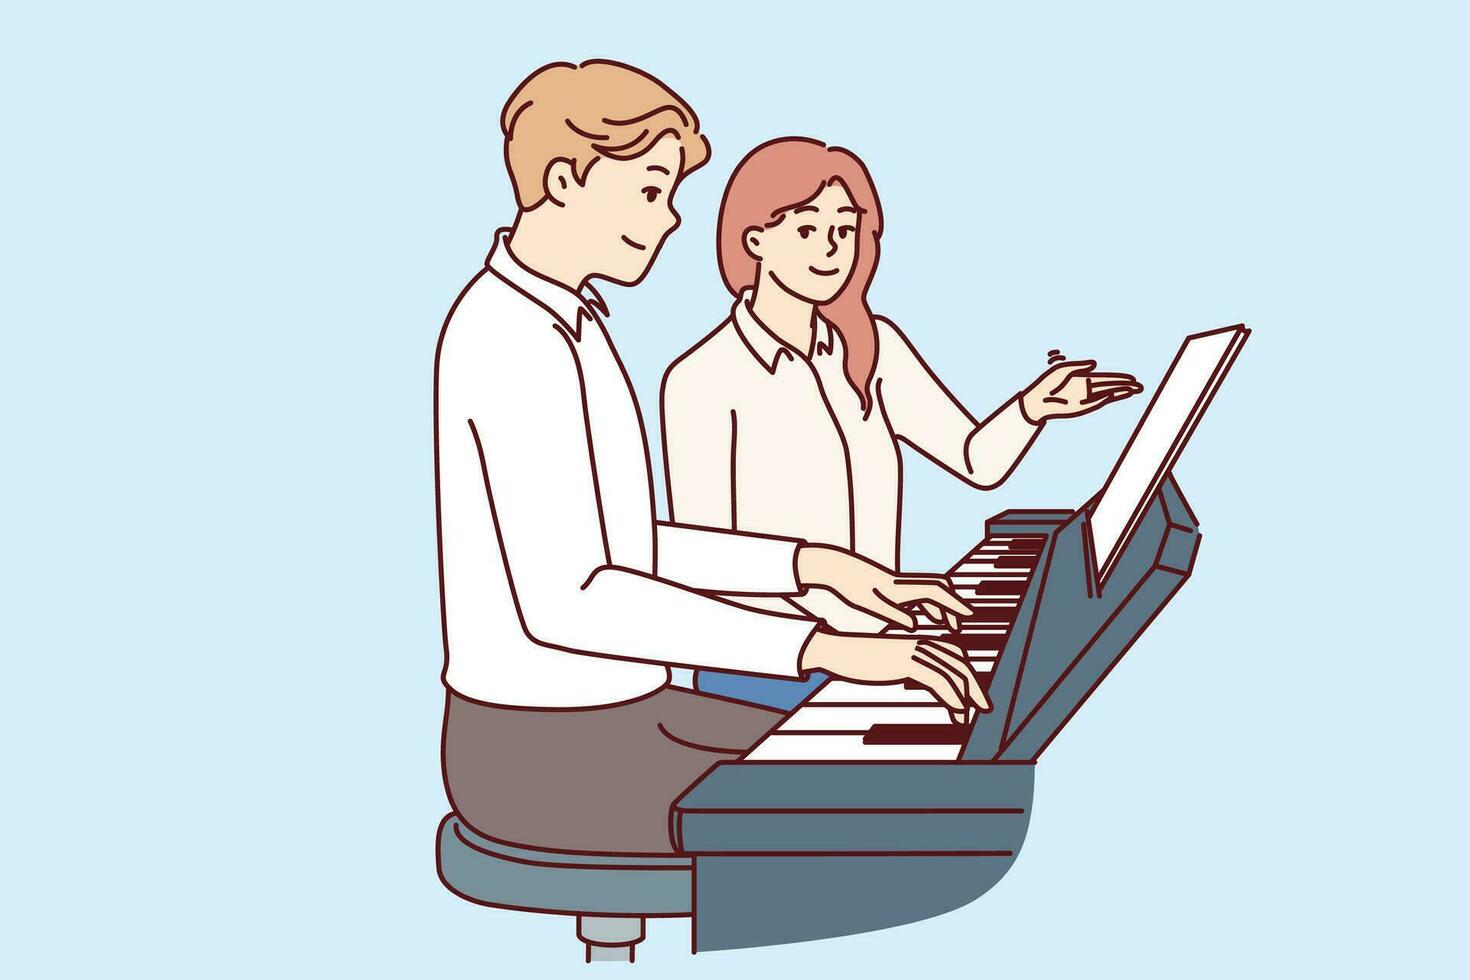 Man learns to play piano with woman teacher who tutors and gives private lessons. Future musician plays piano to become professional composer or perform at concerts in front of audience vector